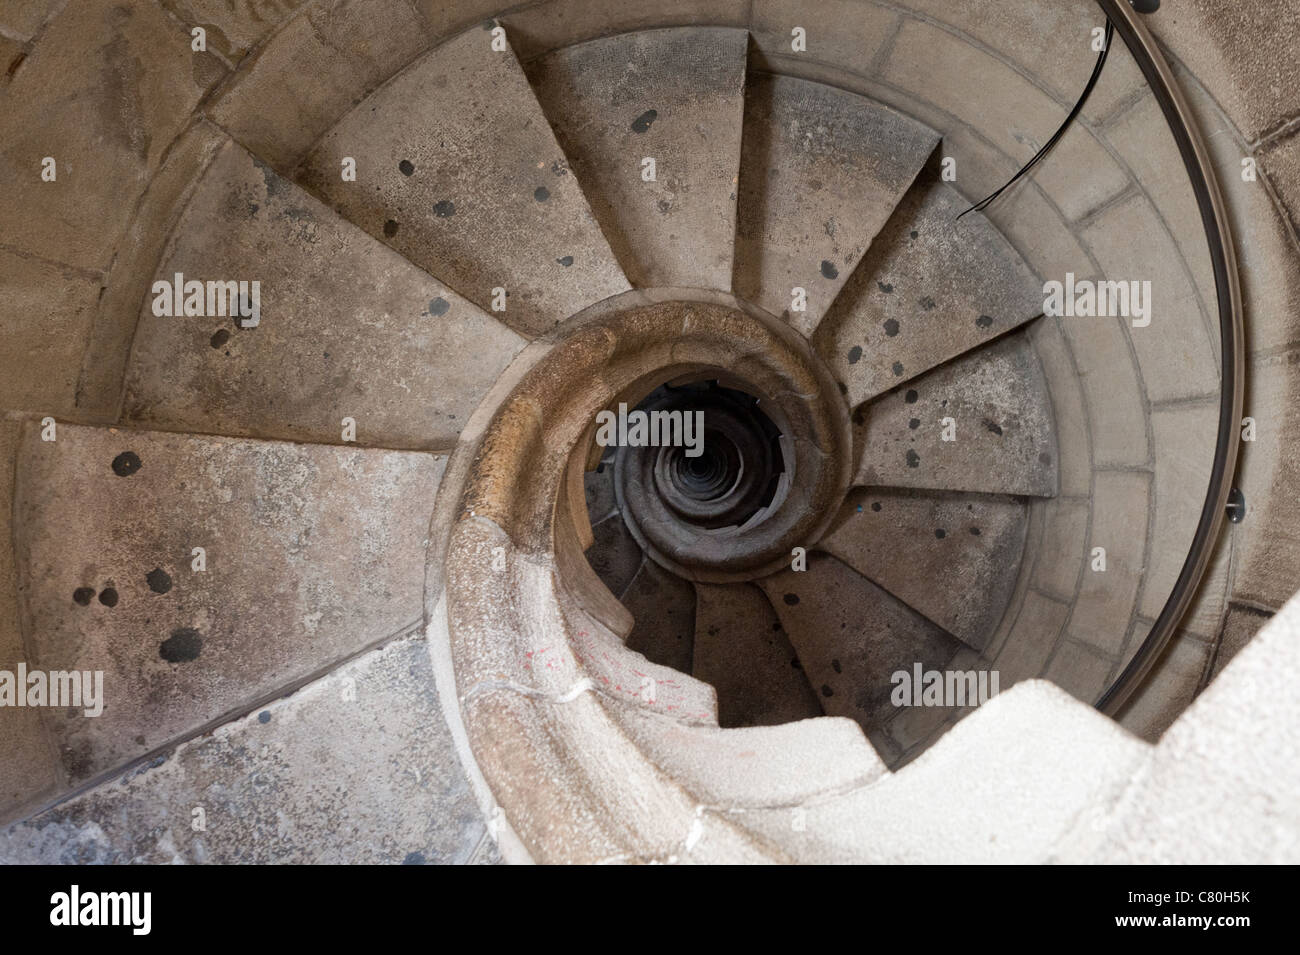 A spiral staircase in the Sagrada Familia Cathedral designed by Gaudi in Barcelona, Spain Stock Photo